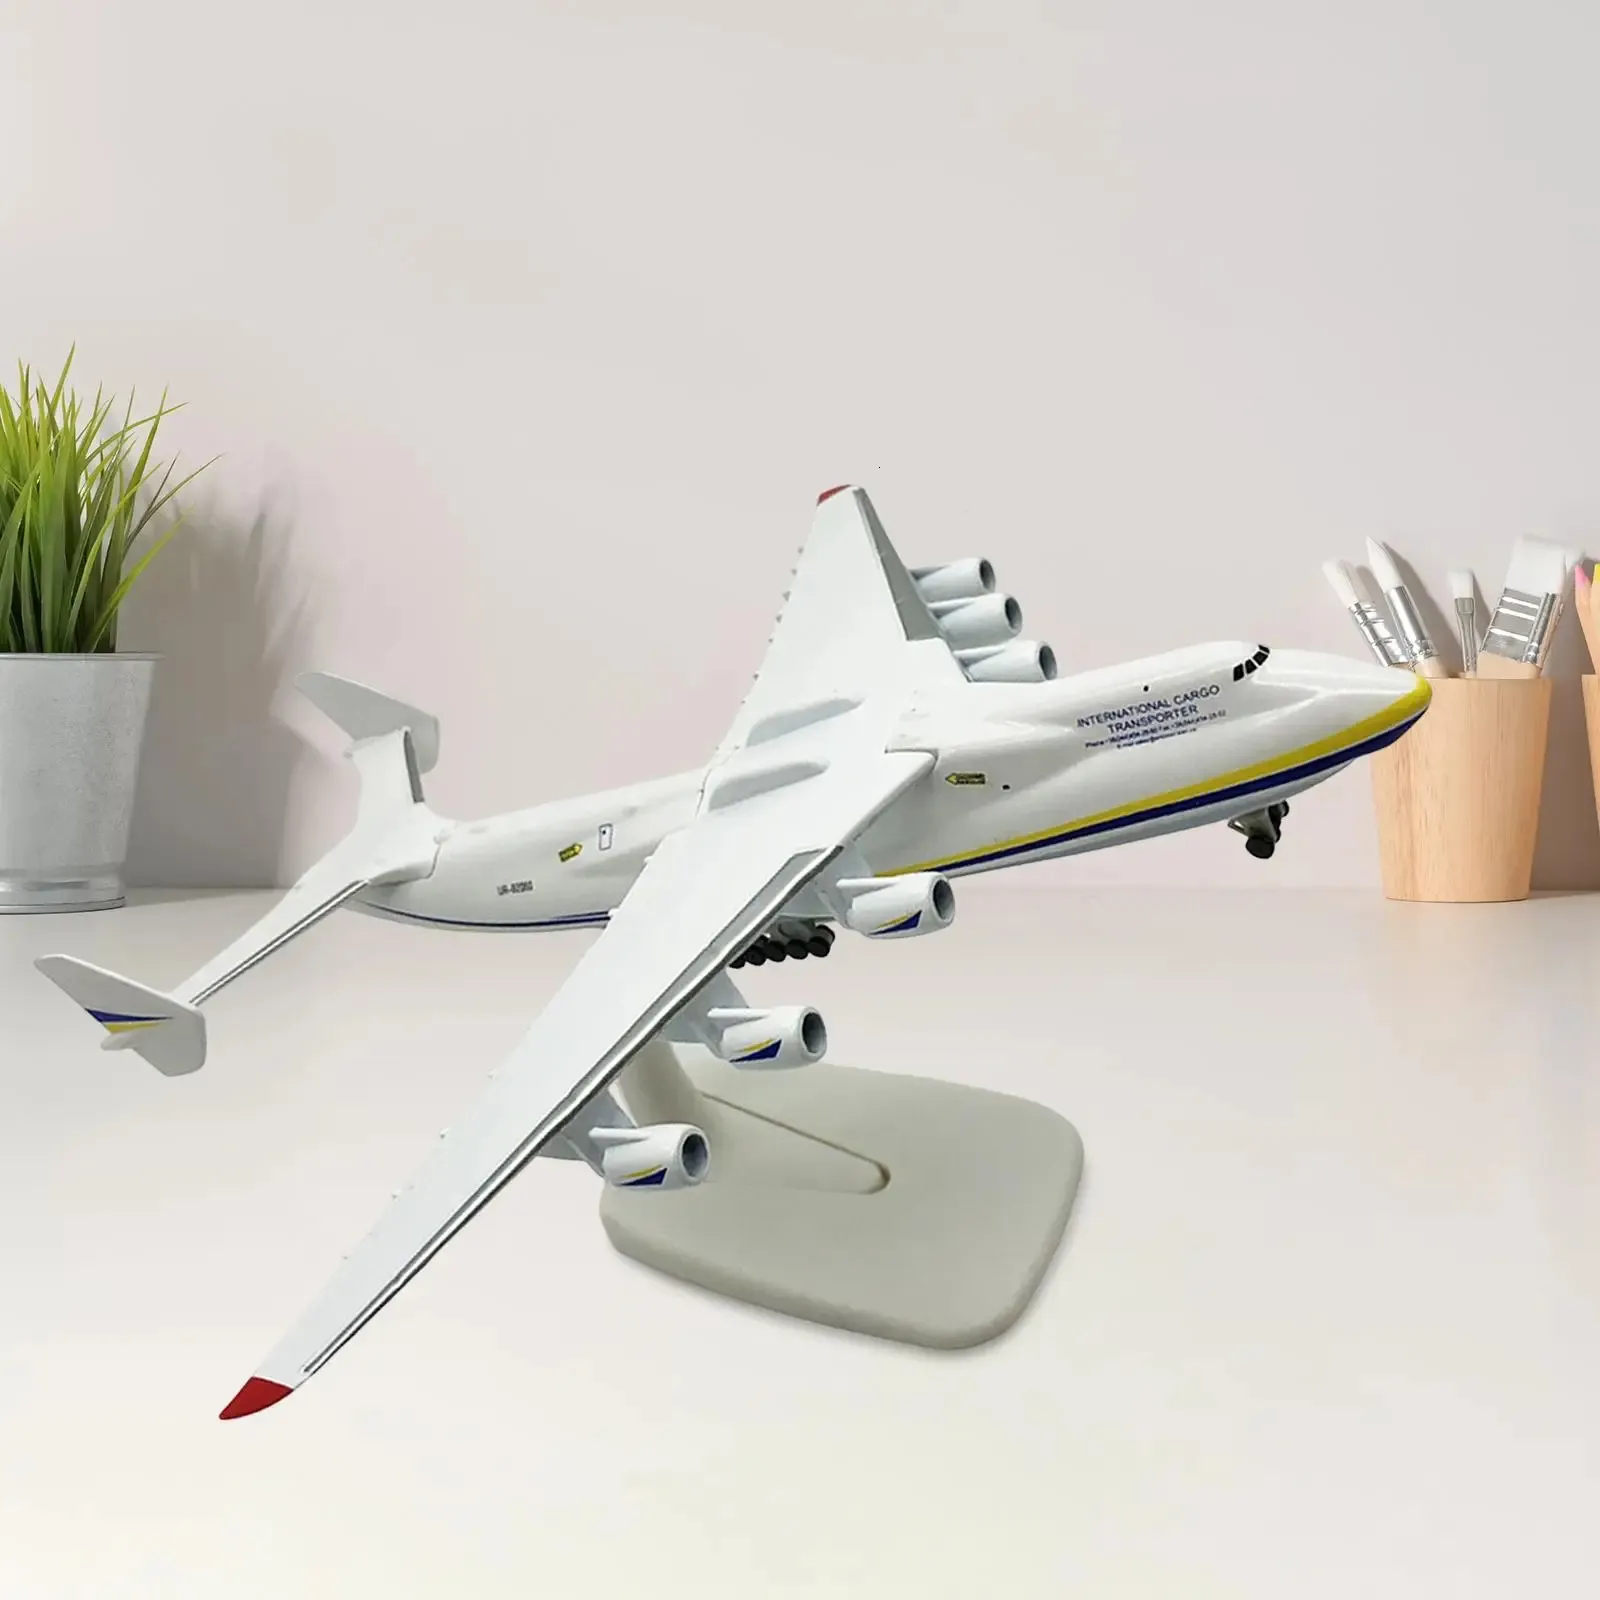 Alloy Metal Model Aircraft Air Plane Model Accuracy Fighter Model for Commemorate Collection Gift Party Favor Boy 240118 Best quality